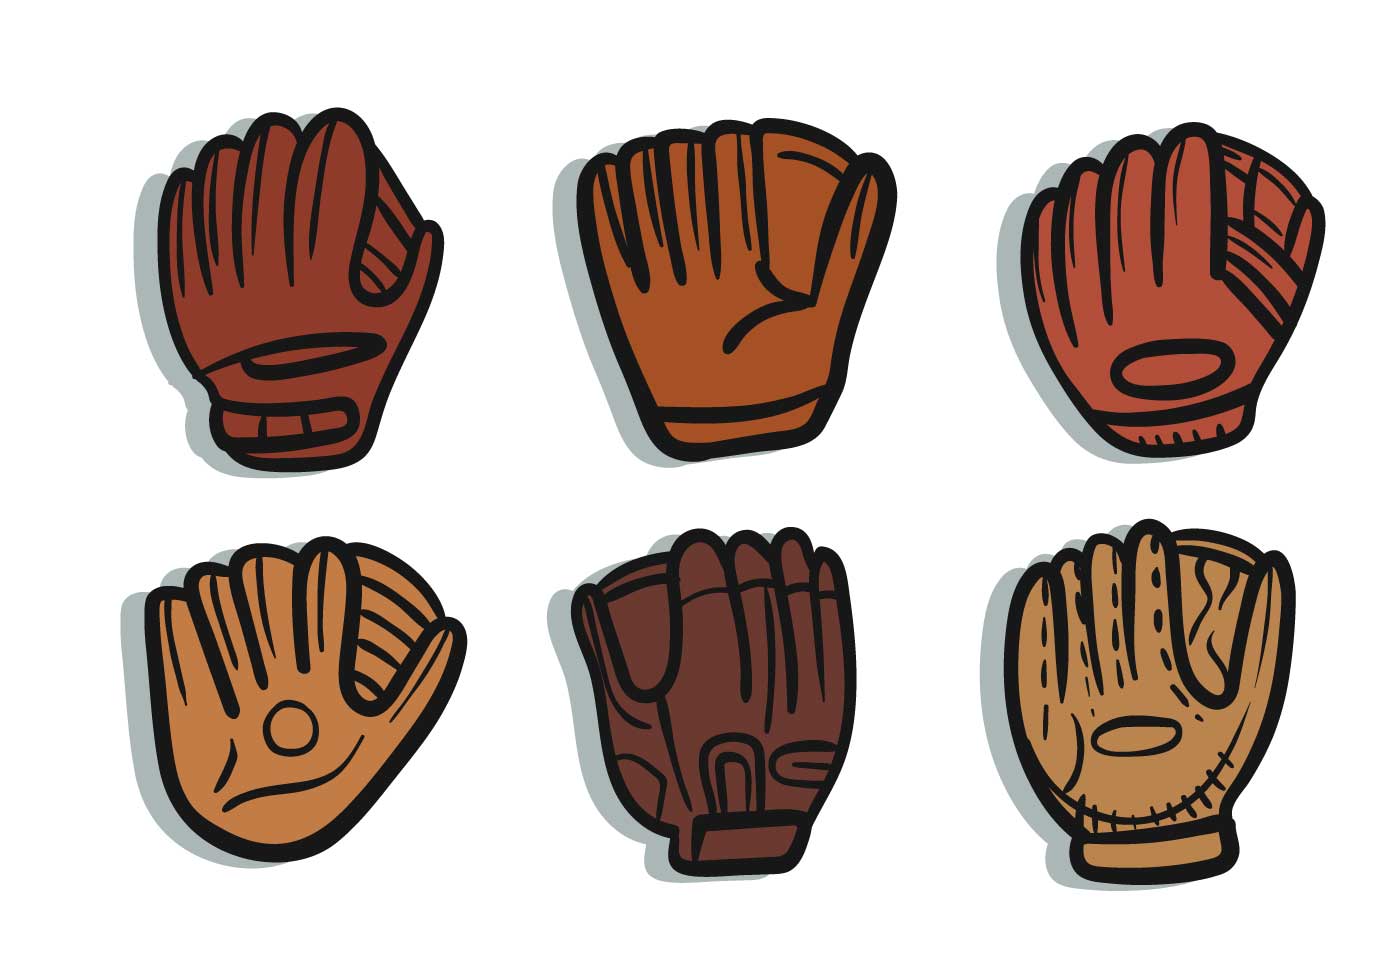 Download the Softball glove vector 163797